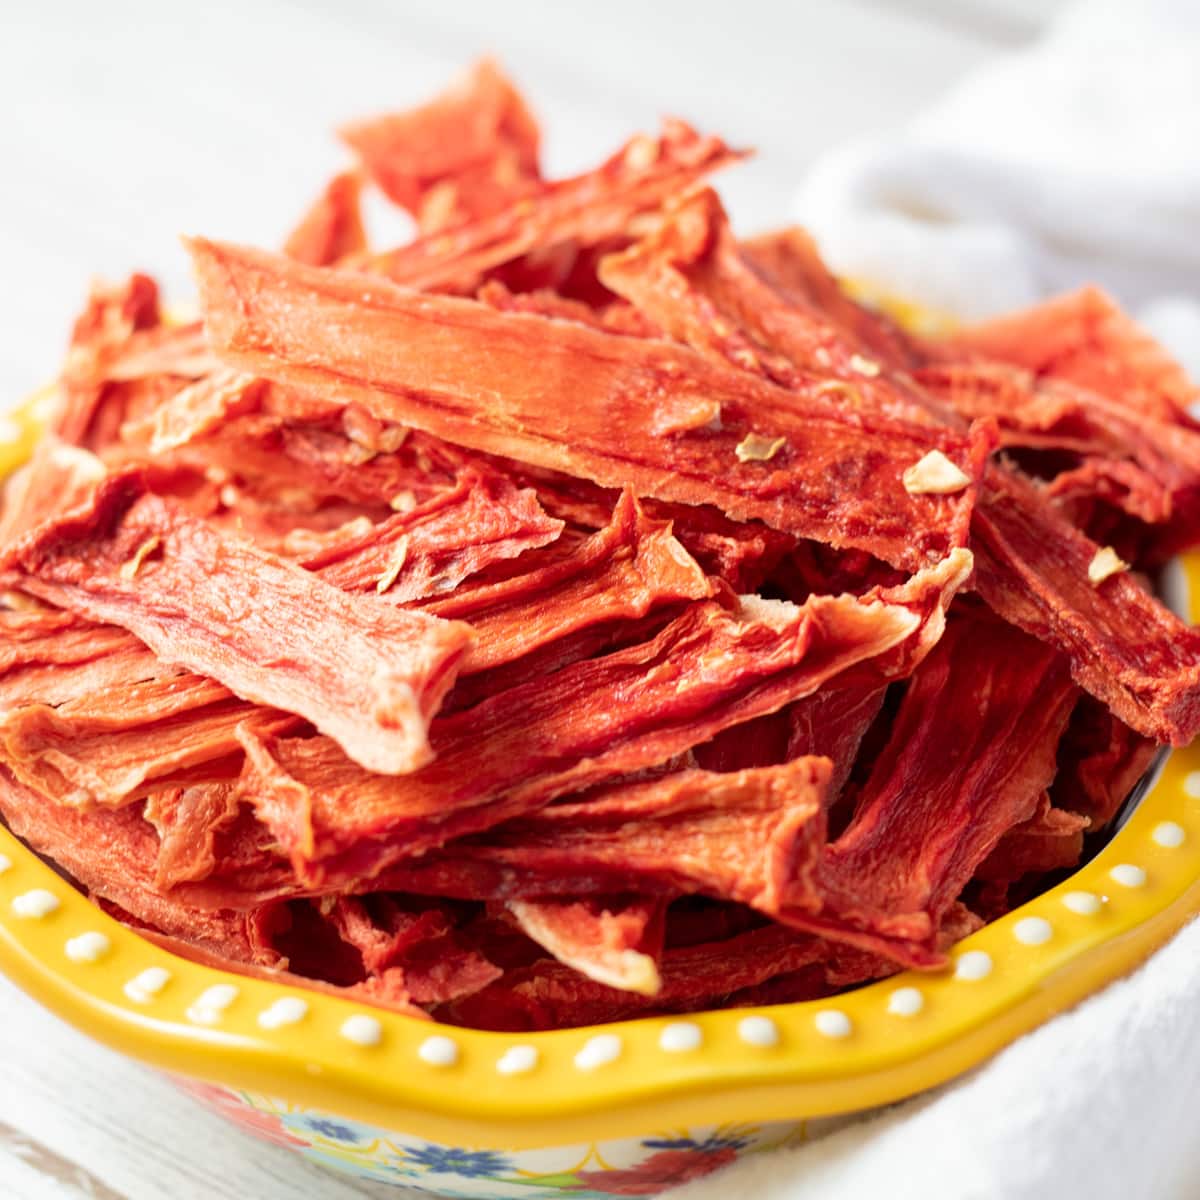 Easy, tasty dehydrated watermelon jerky in small serving bowl on light background.